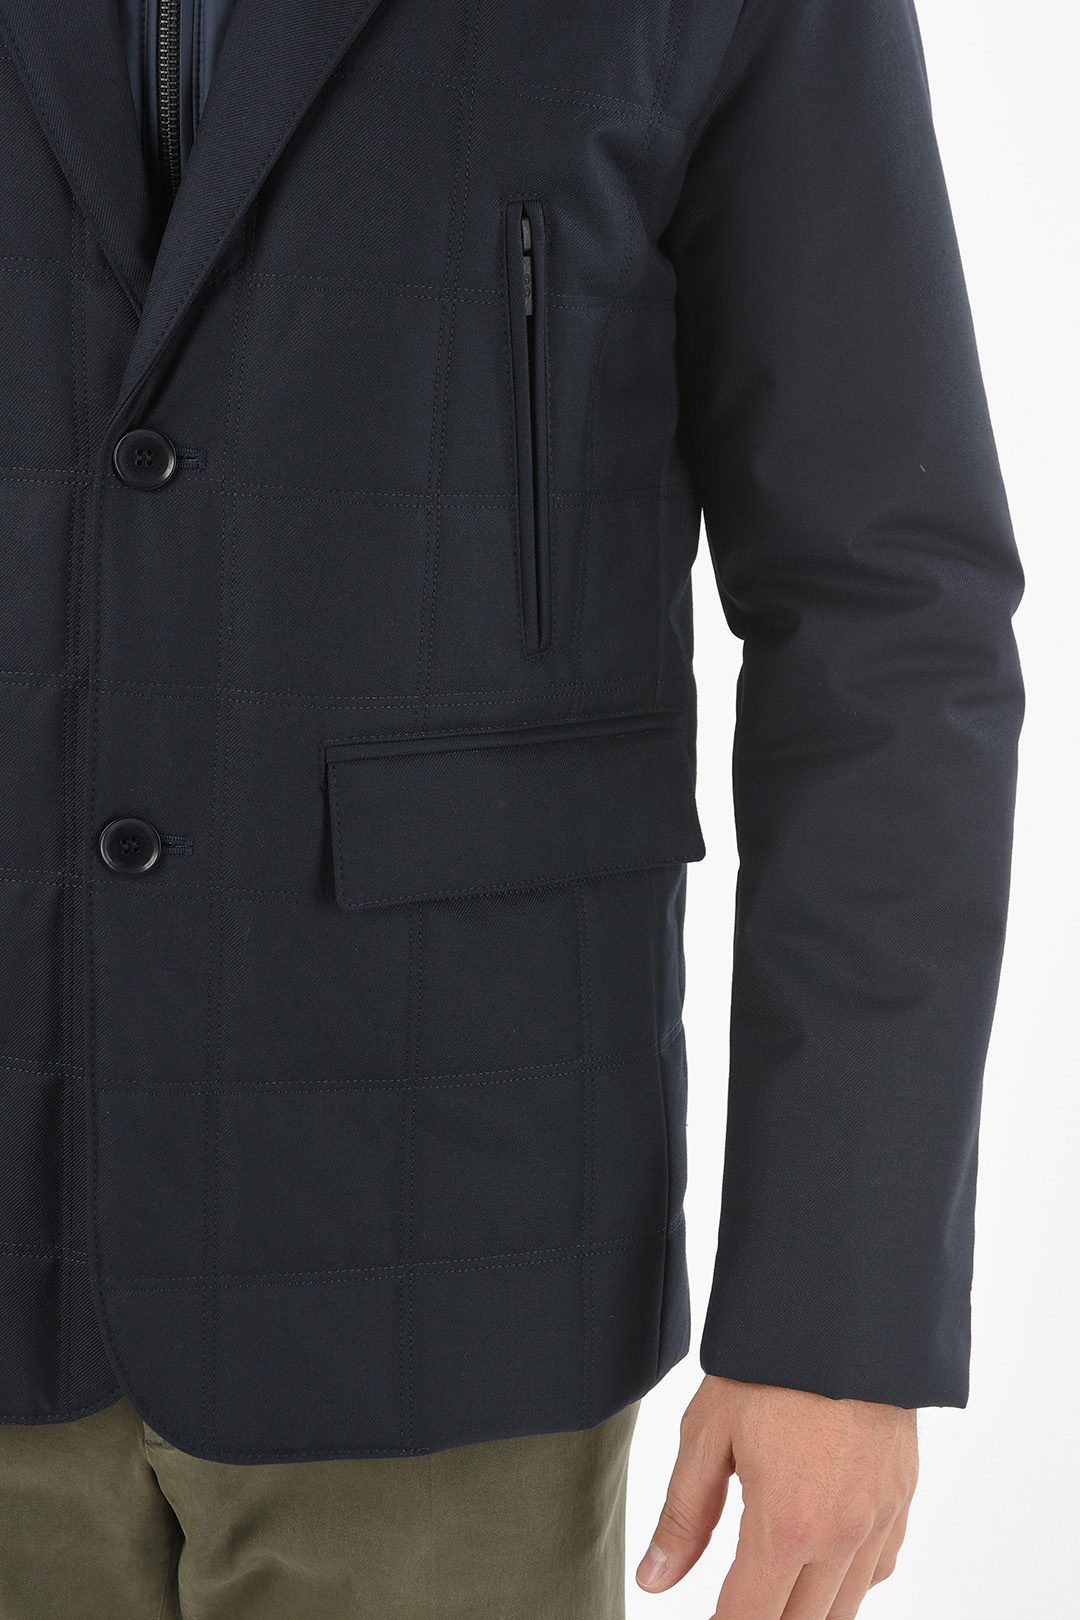 Corneliani CC COLLECTION Removable Chester Piece CENSIN Quilted Blazer ...